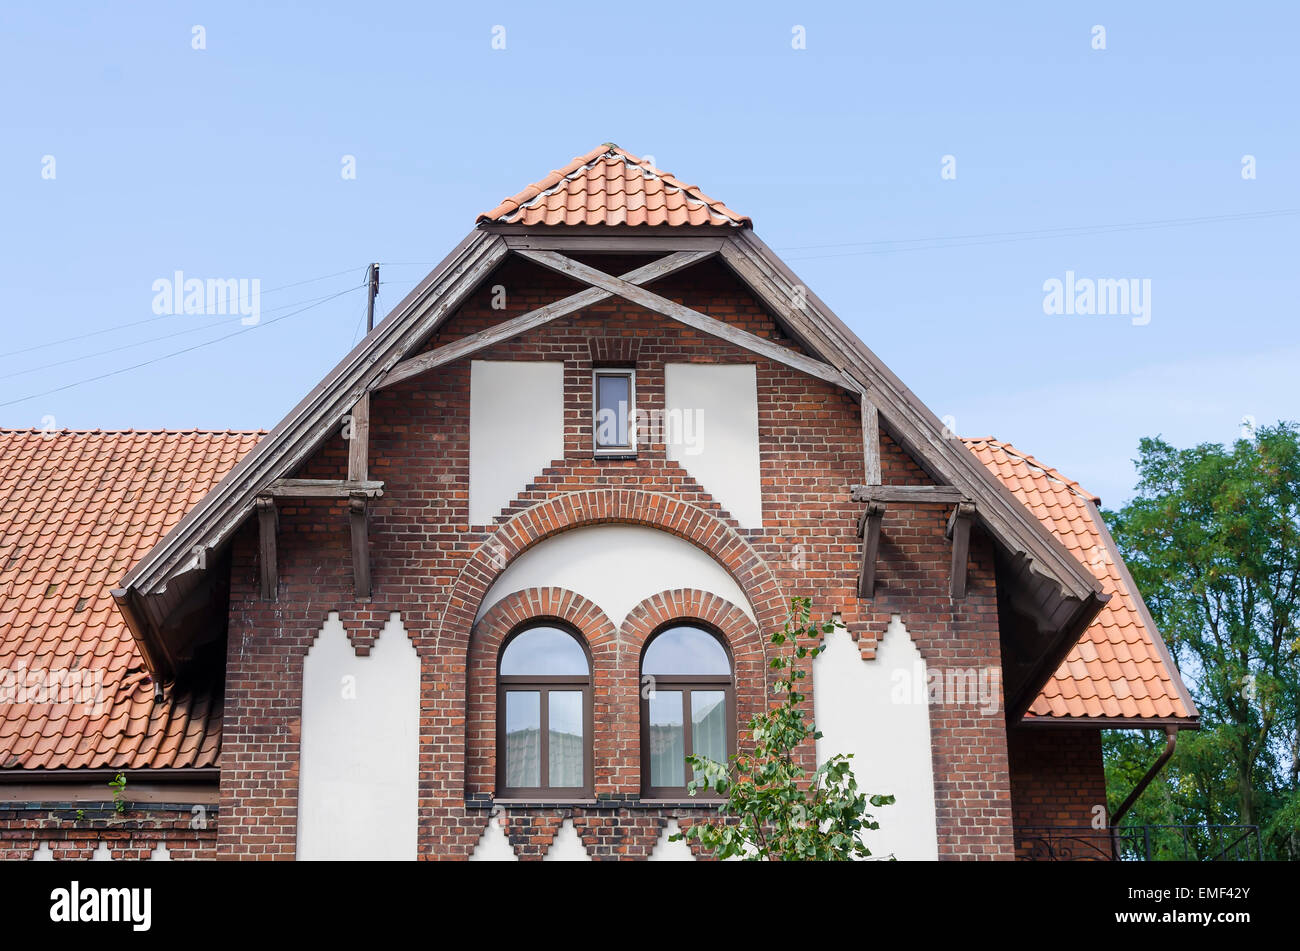 Klaipeda Lithuania  New Town residential red brick architecture with gable roof Stock Photo